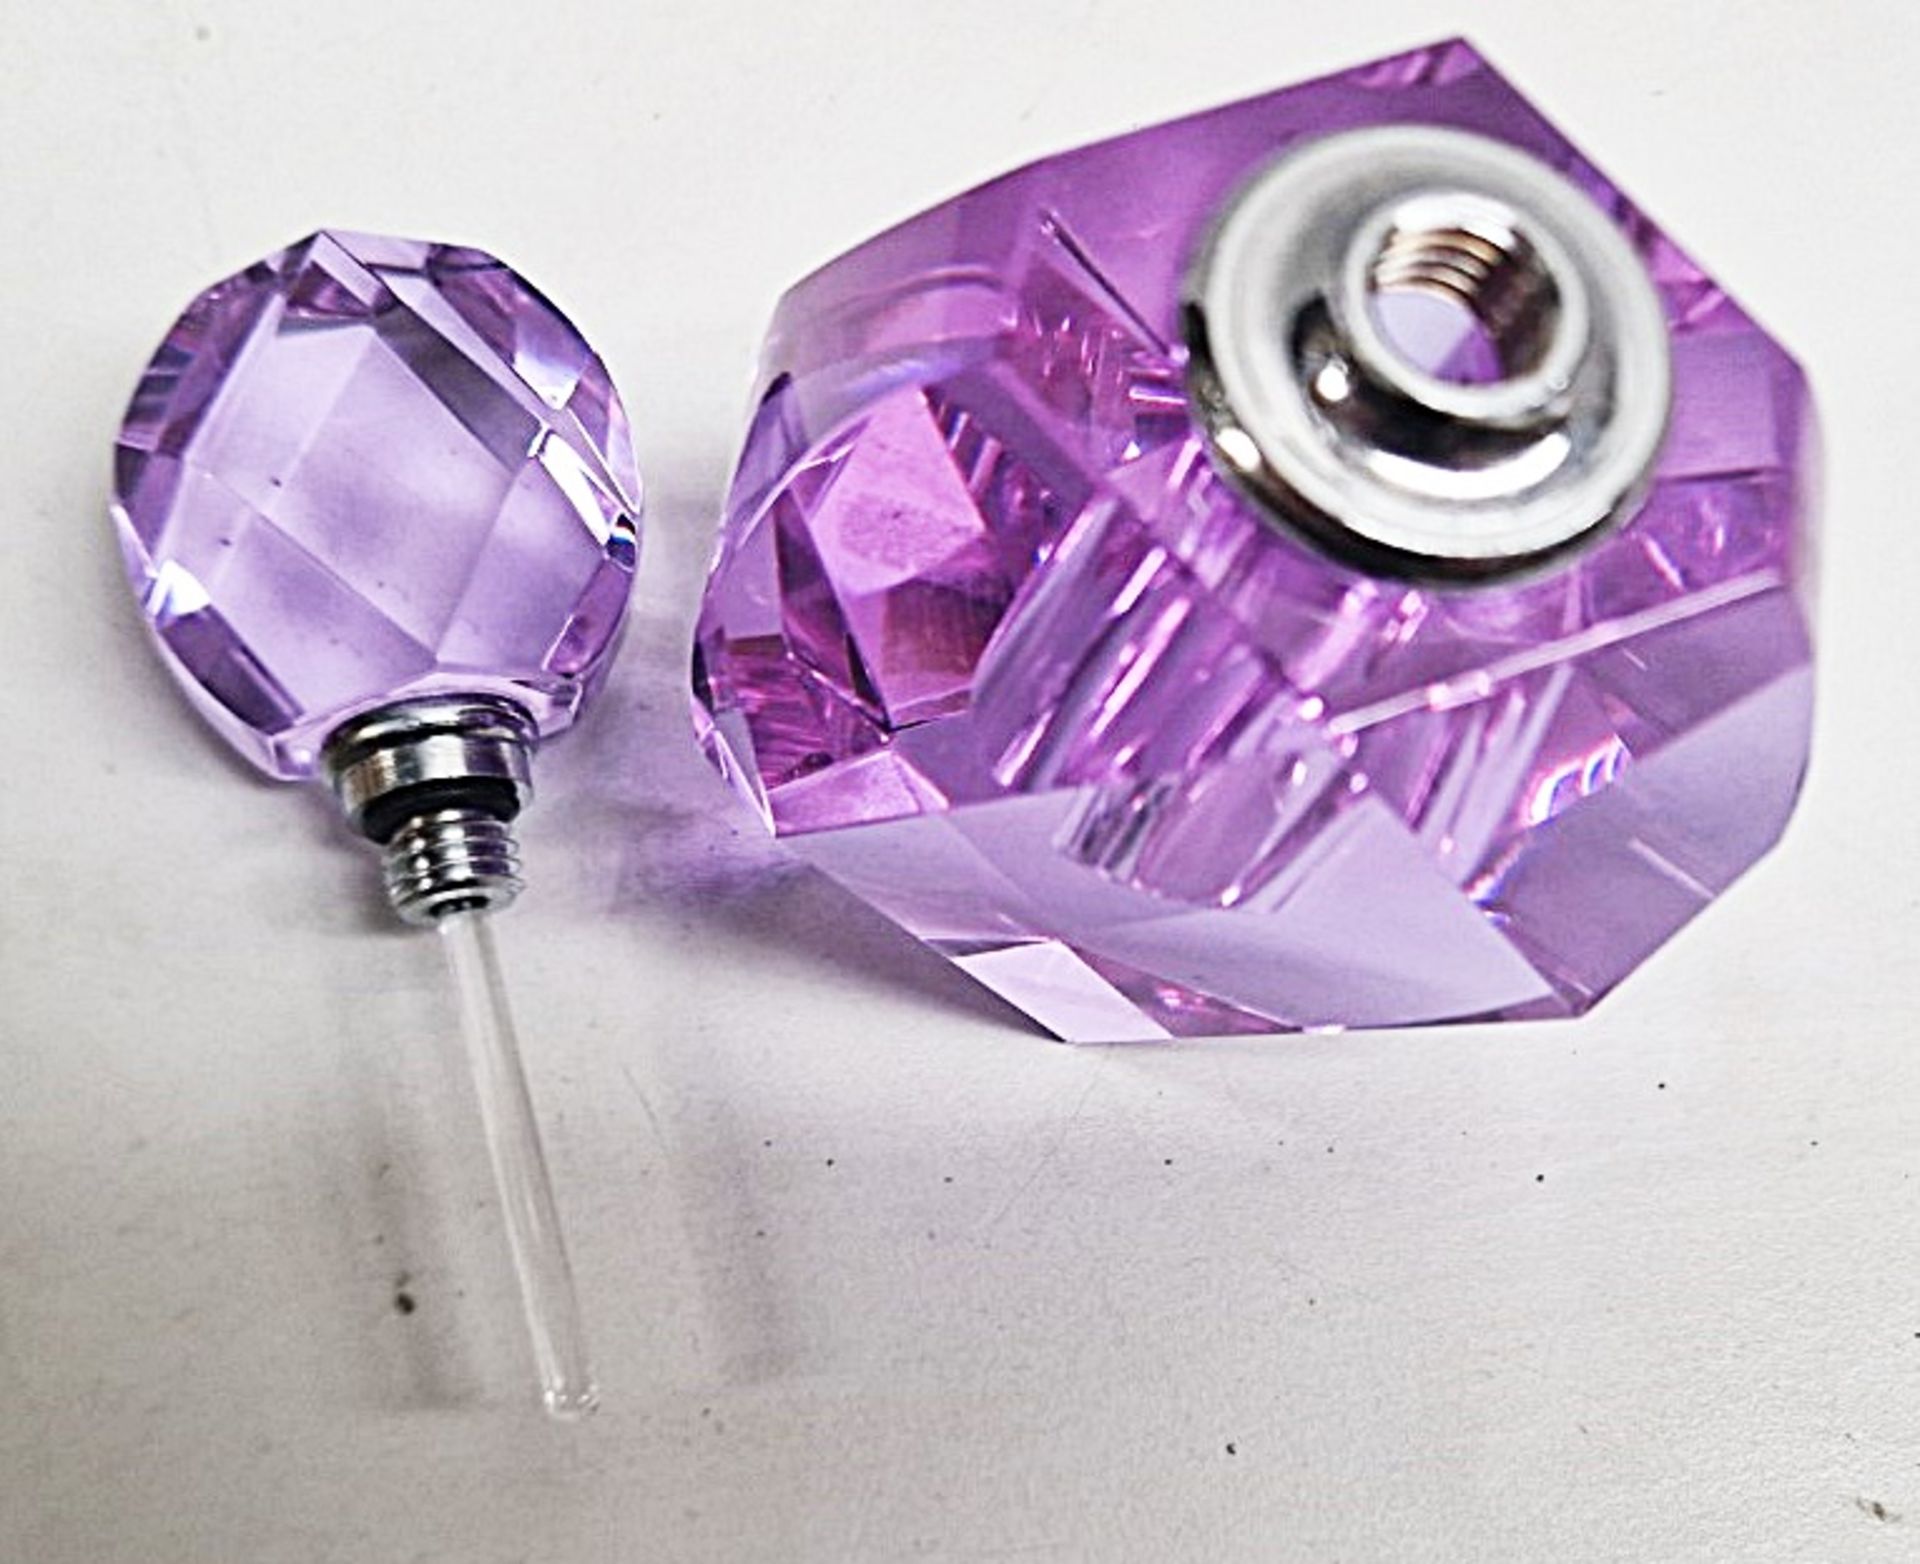 1 x Beautiful Purple Crystal Glass Perfume Bottle With Dauber And Threaded Stopper - Image 2 of 6